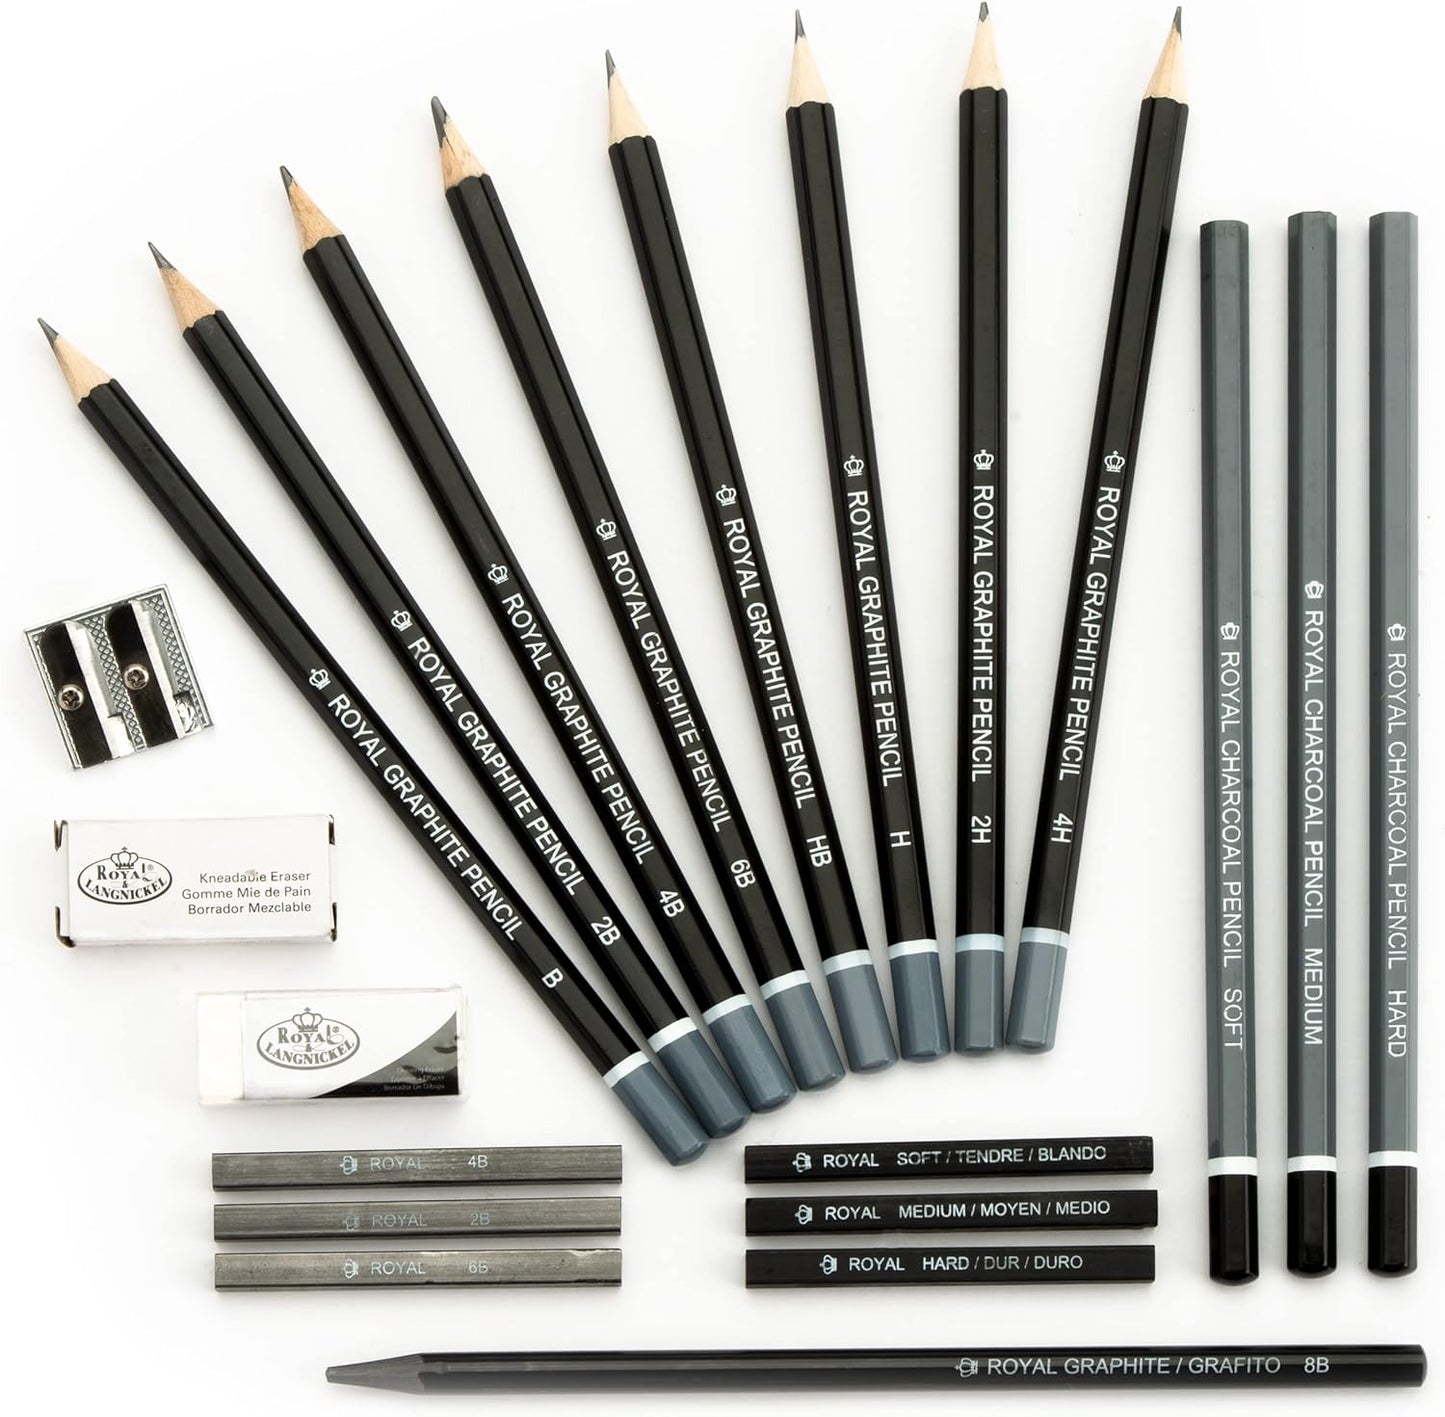 21 Piece Sketching Graphite Pencil Set Art Supplies Drawing Tools For –  StoreHotSalesFreeShop